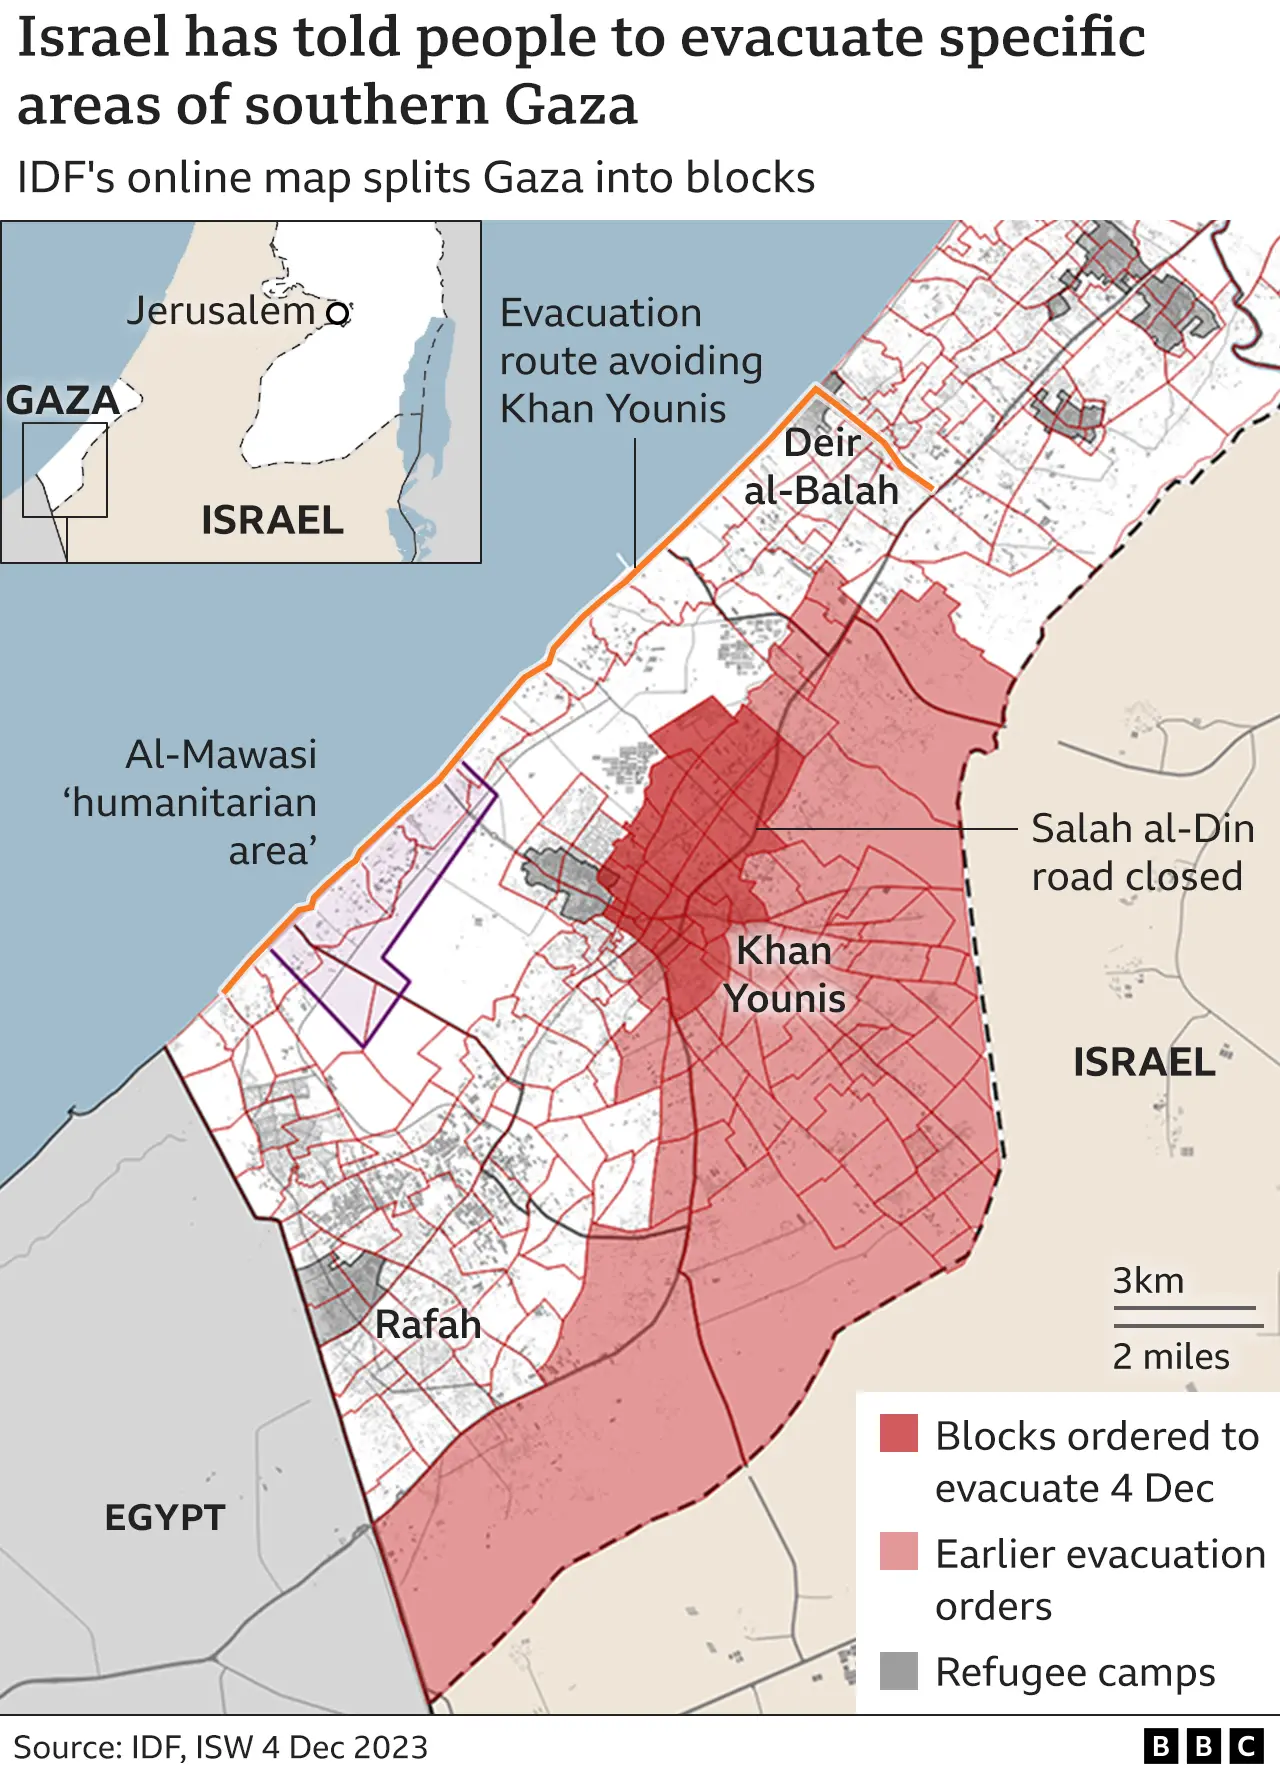 https://ichef.bbci.co.uk/news/1536/cpsprodpb/8DEE/production/_131943363_gaza_south_evacuation_zones_0412_640-nc-2x-nc.png.webp